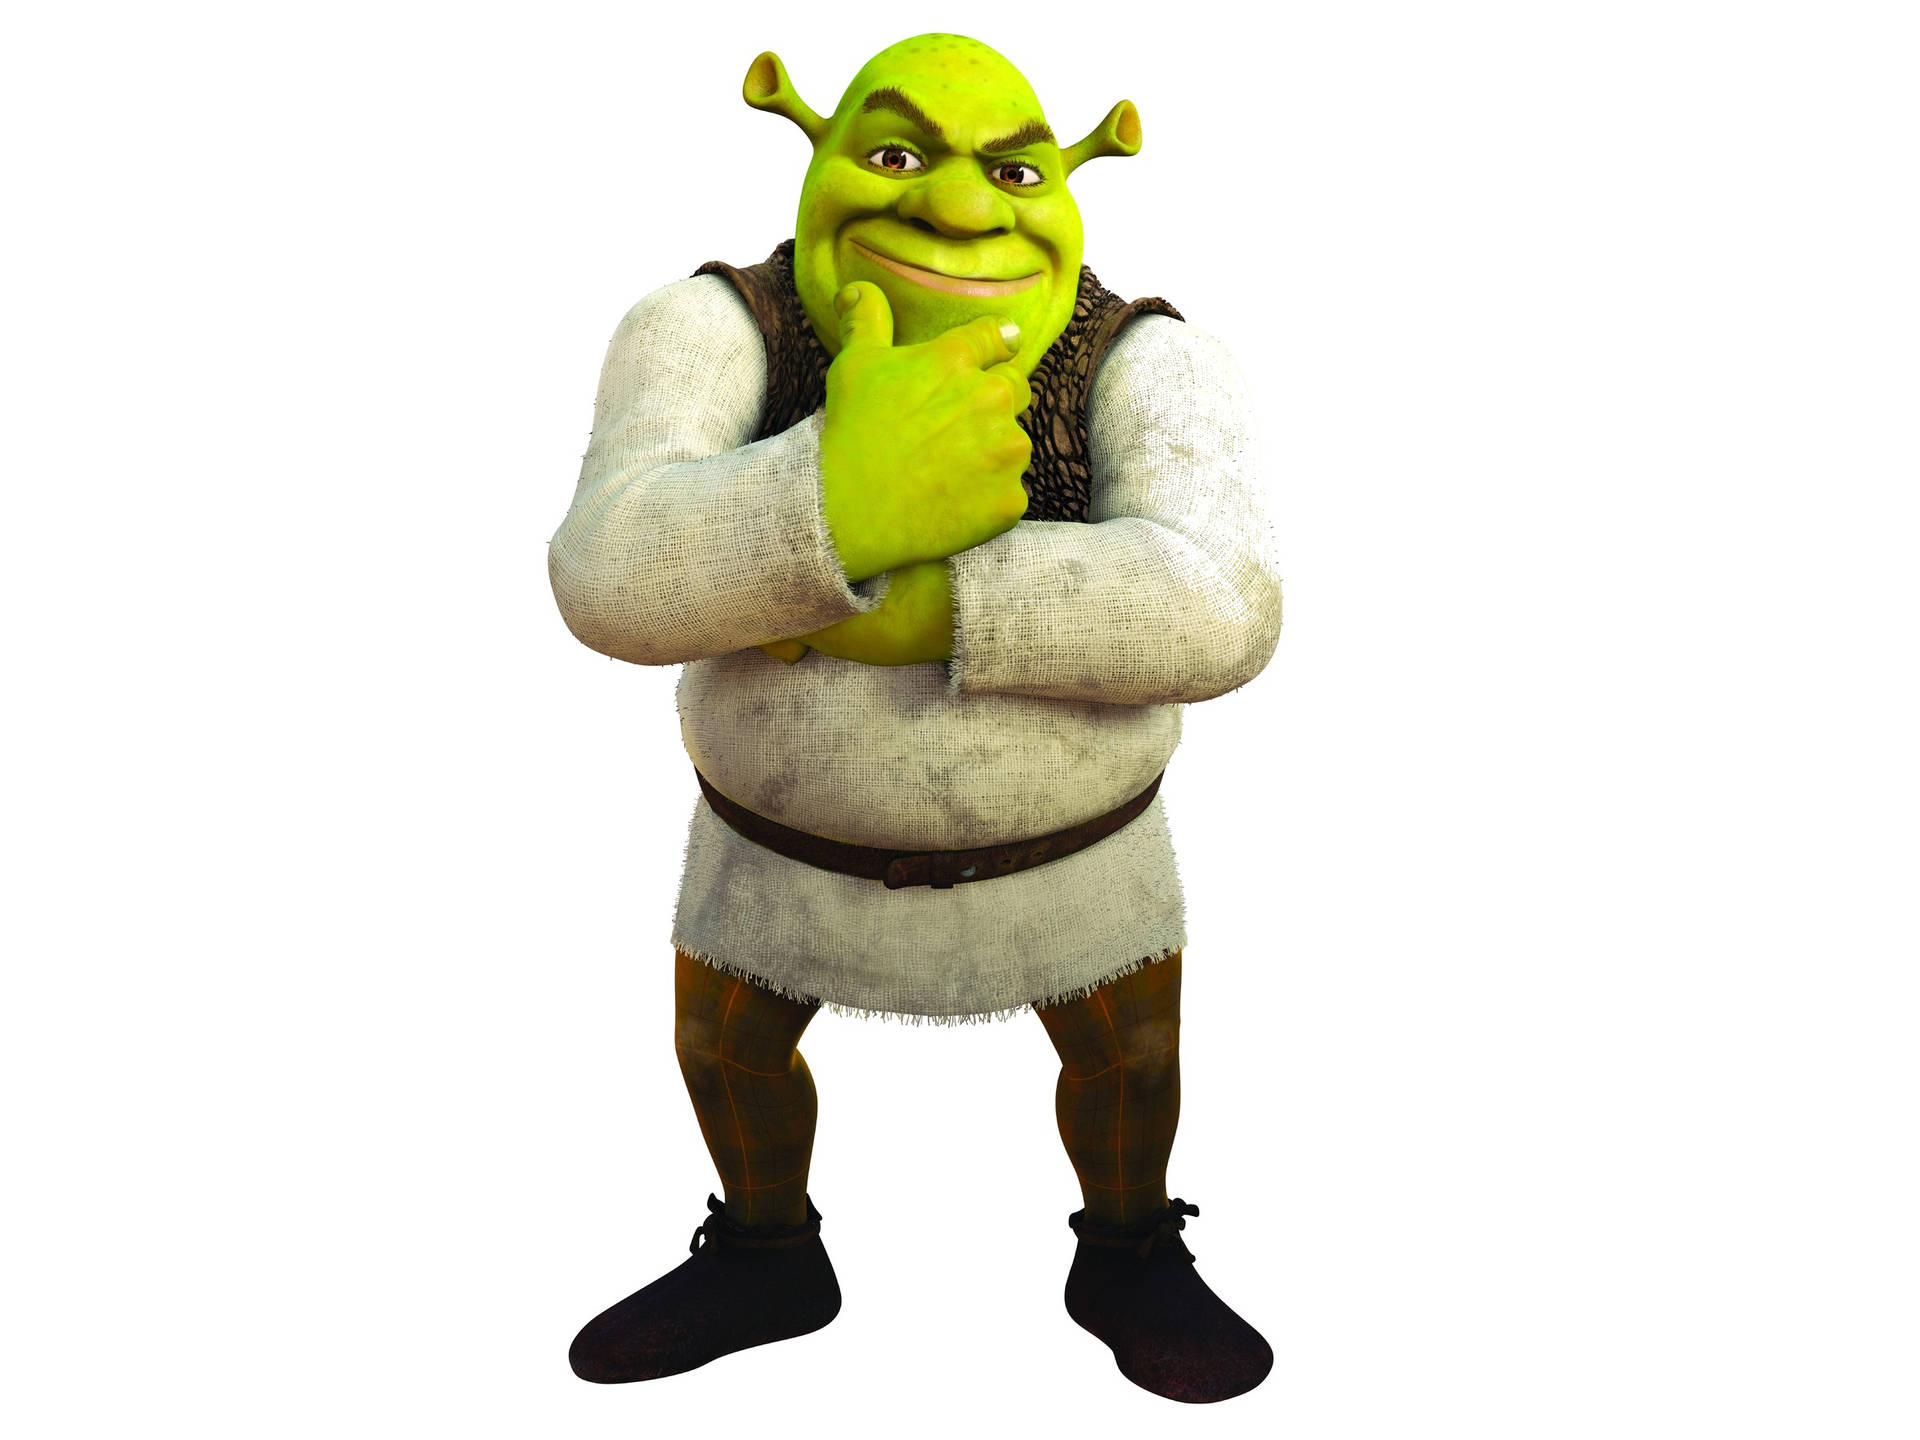 Shrek4k Solo Would Be Translated To 